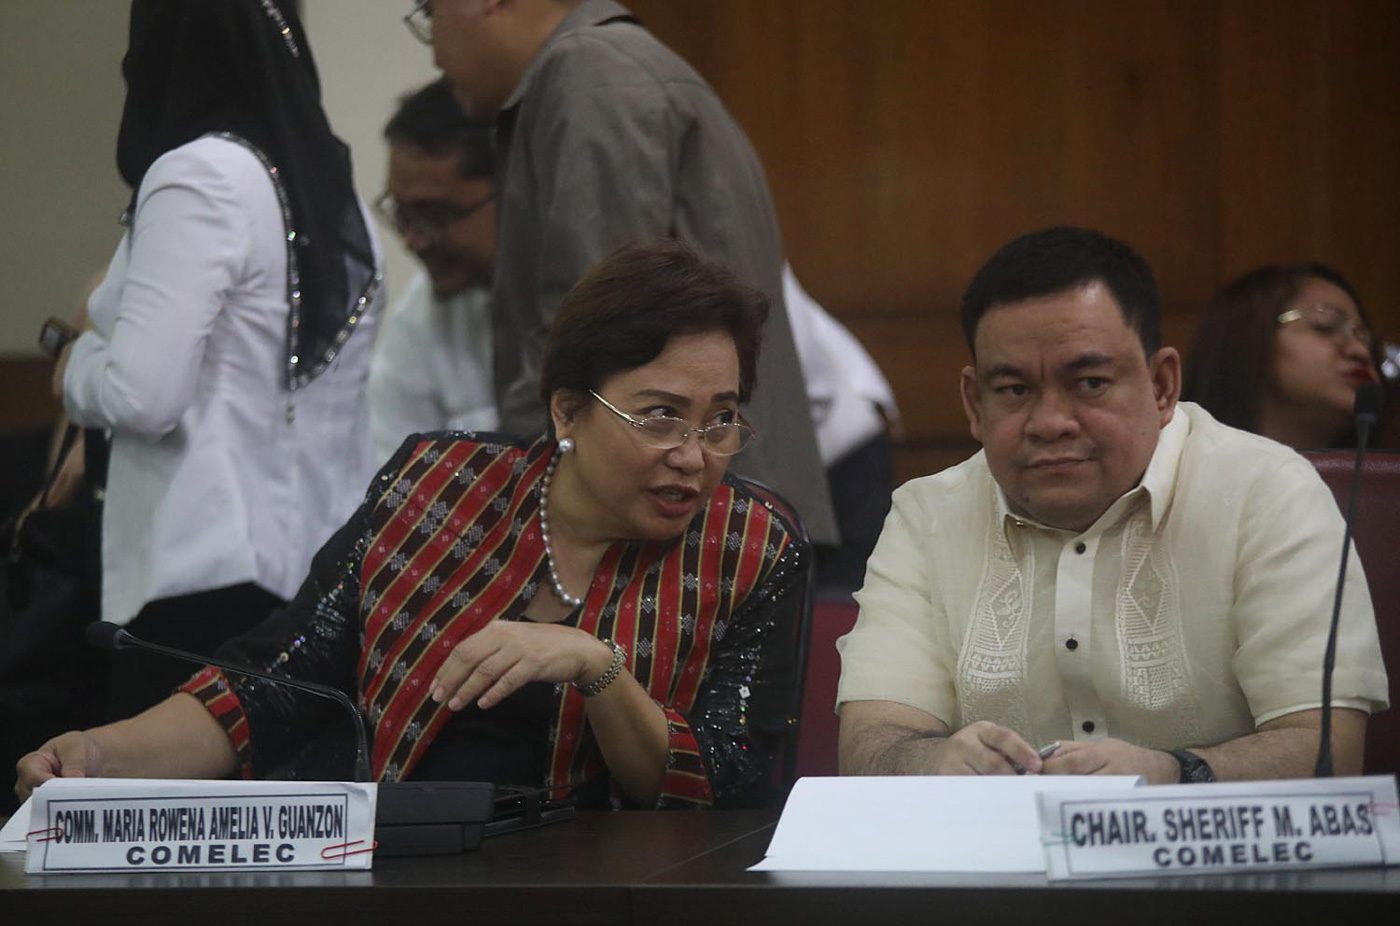 Comelec may need P6-8 billion for federalism plebiscite